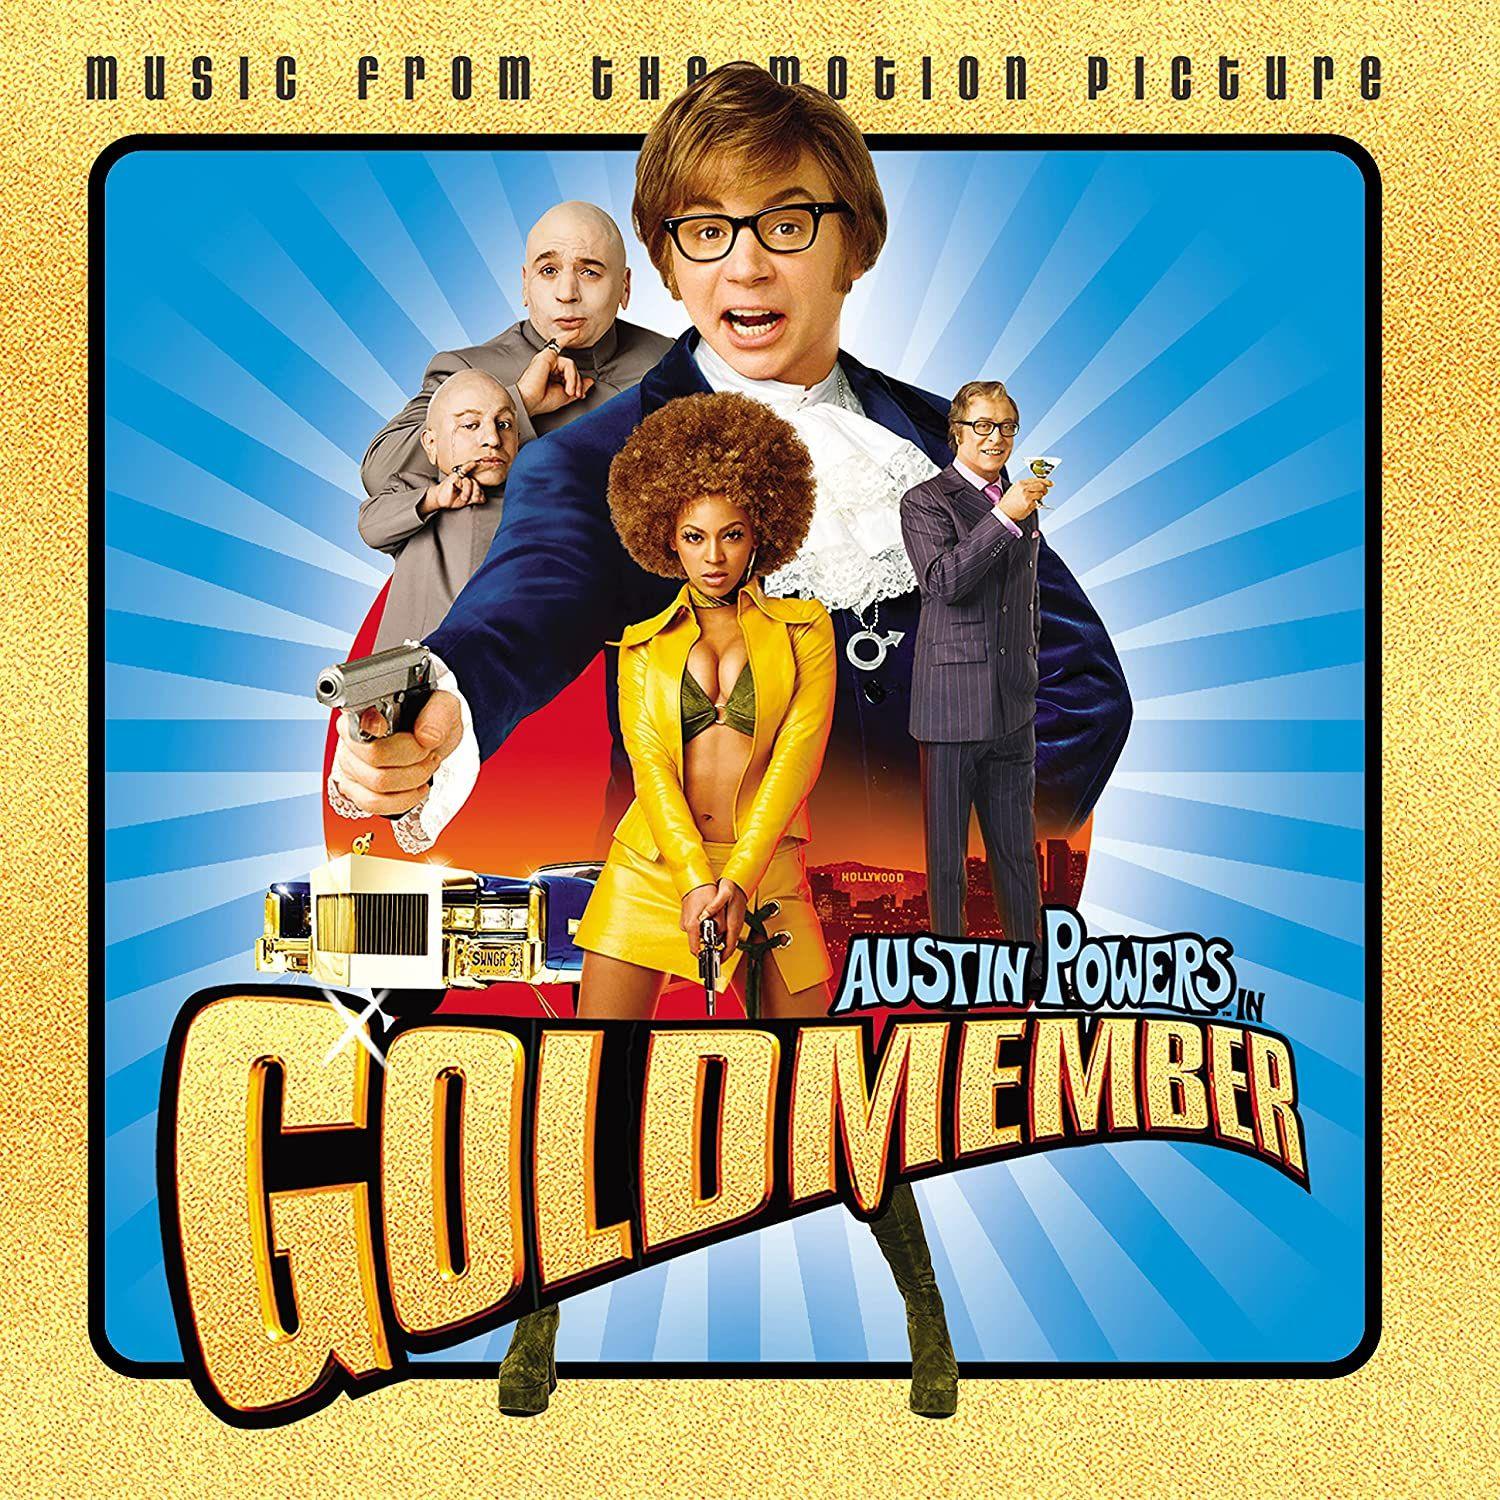 Austin Powers in Goldmember (Music From The Motion Picture) (Gold Vinyl LP)